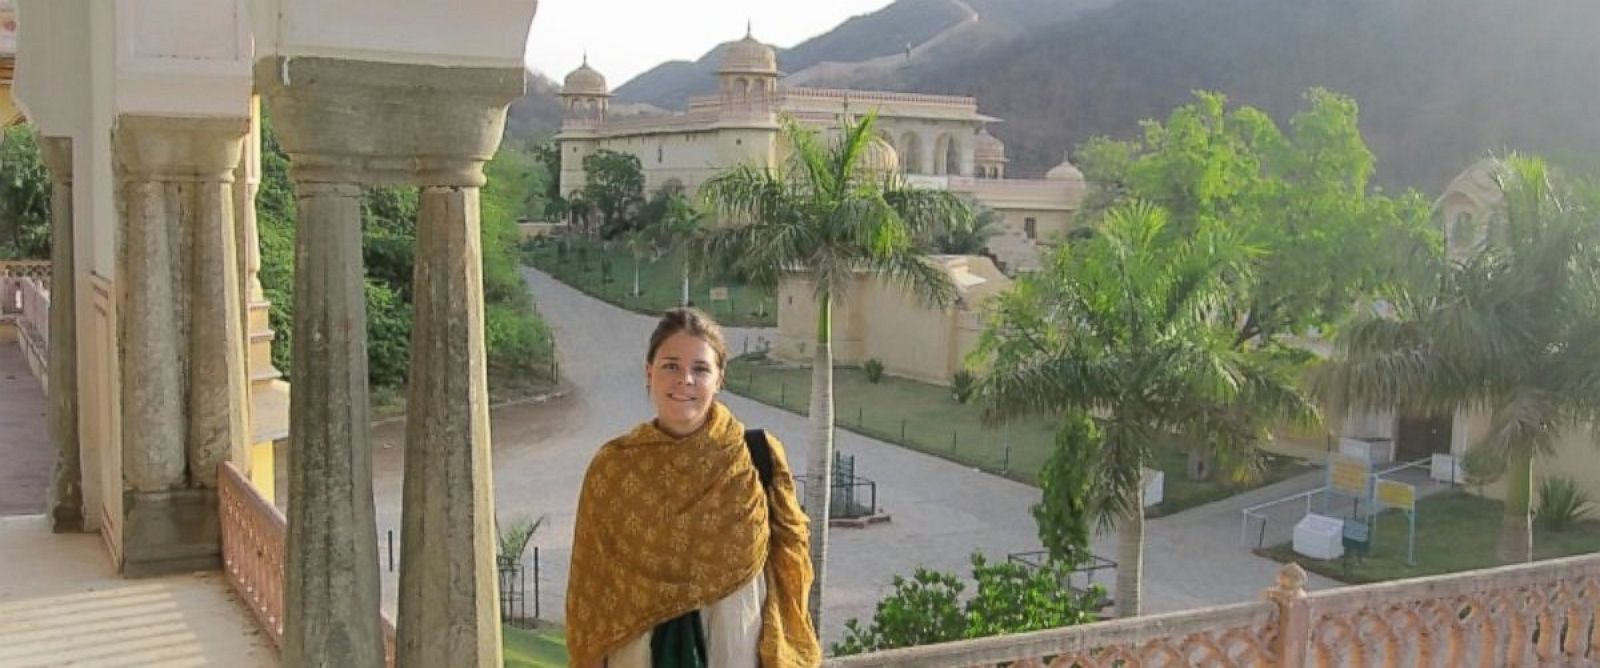 Kayla Mueller is seen here during her travels in this undated photo.